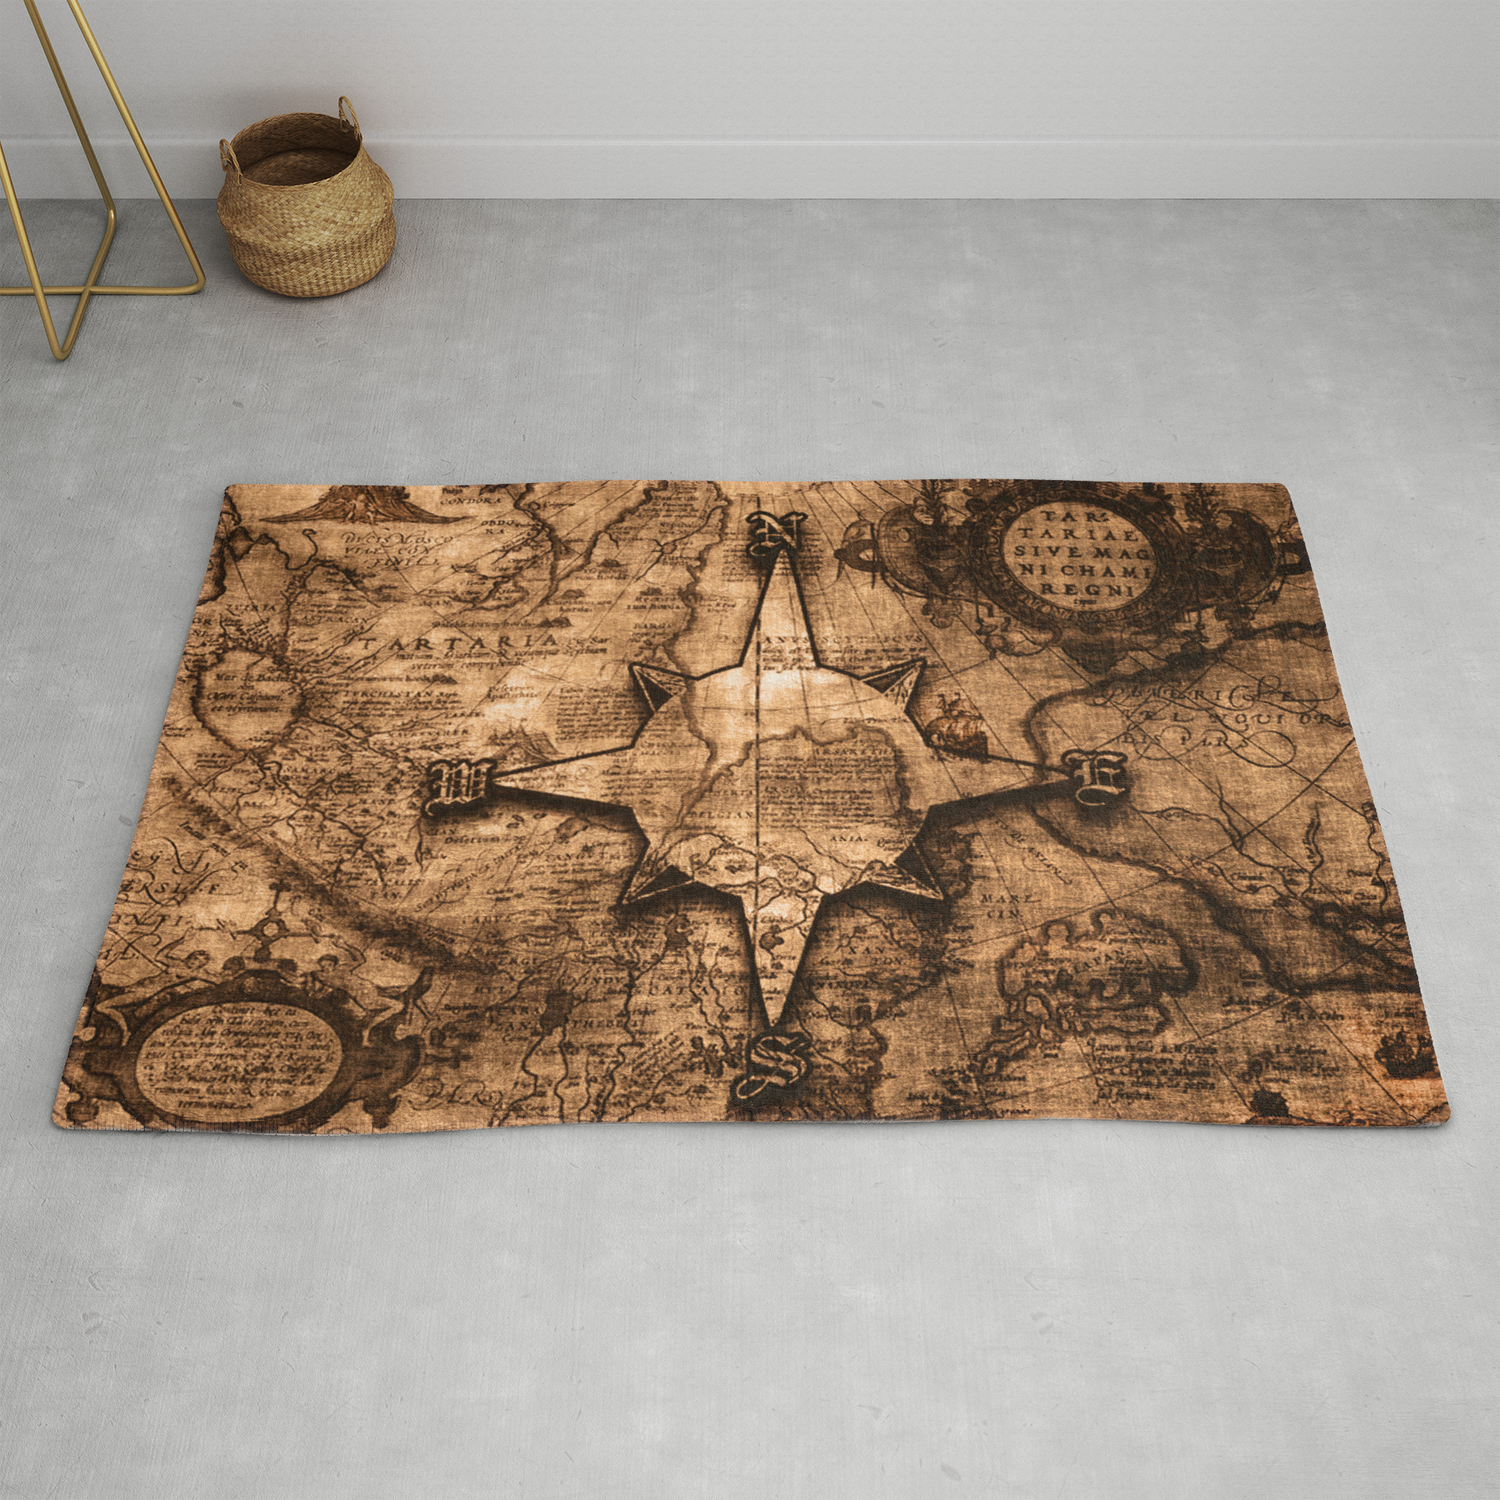 Antique World Map Compass Rose Rug By, Compass Rose Rug